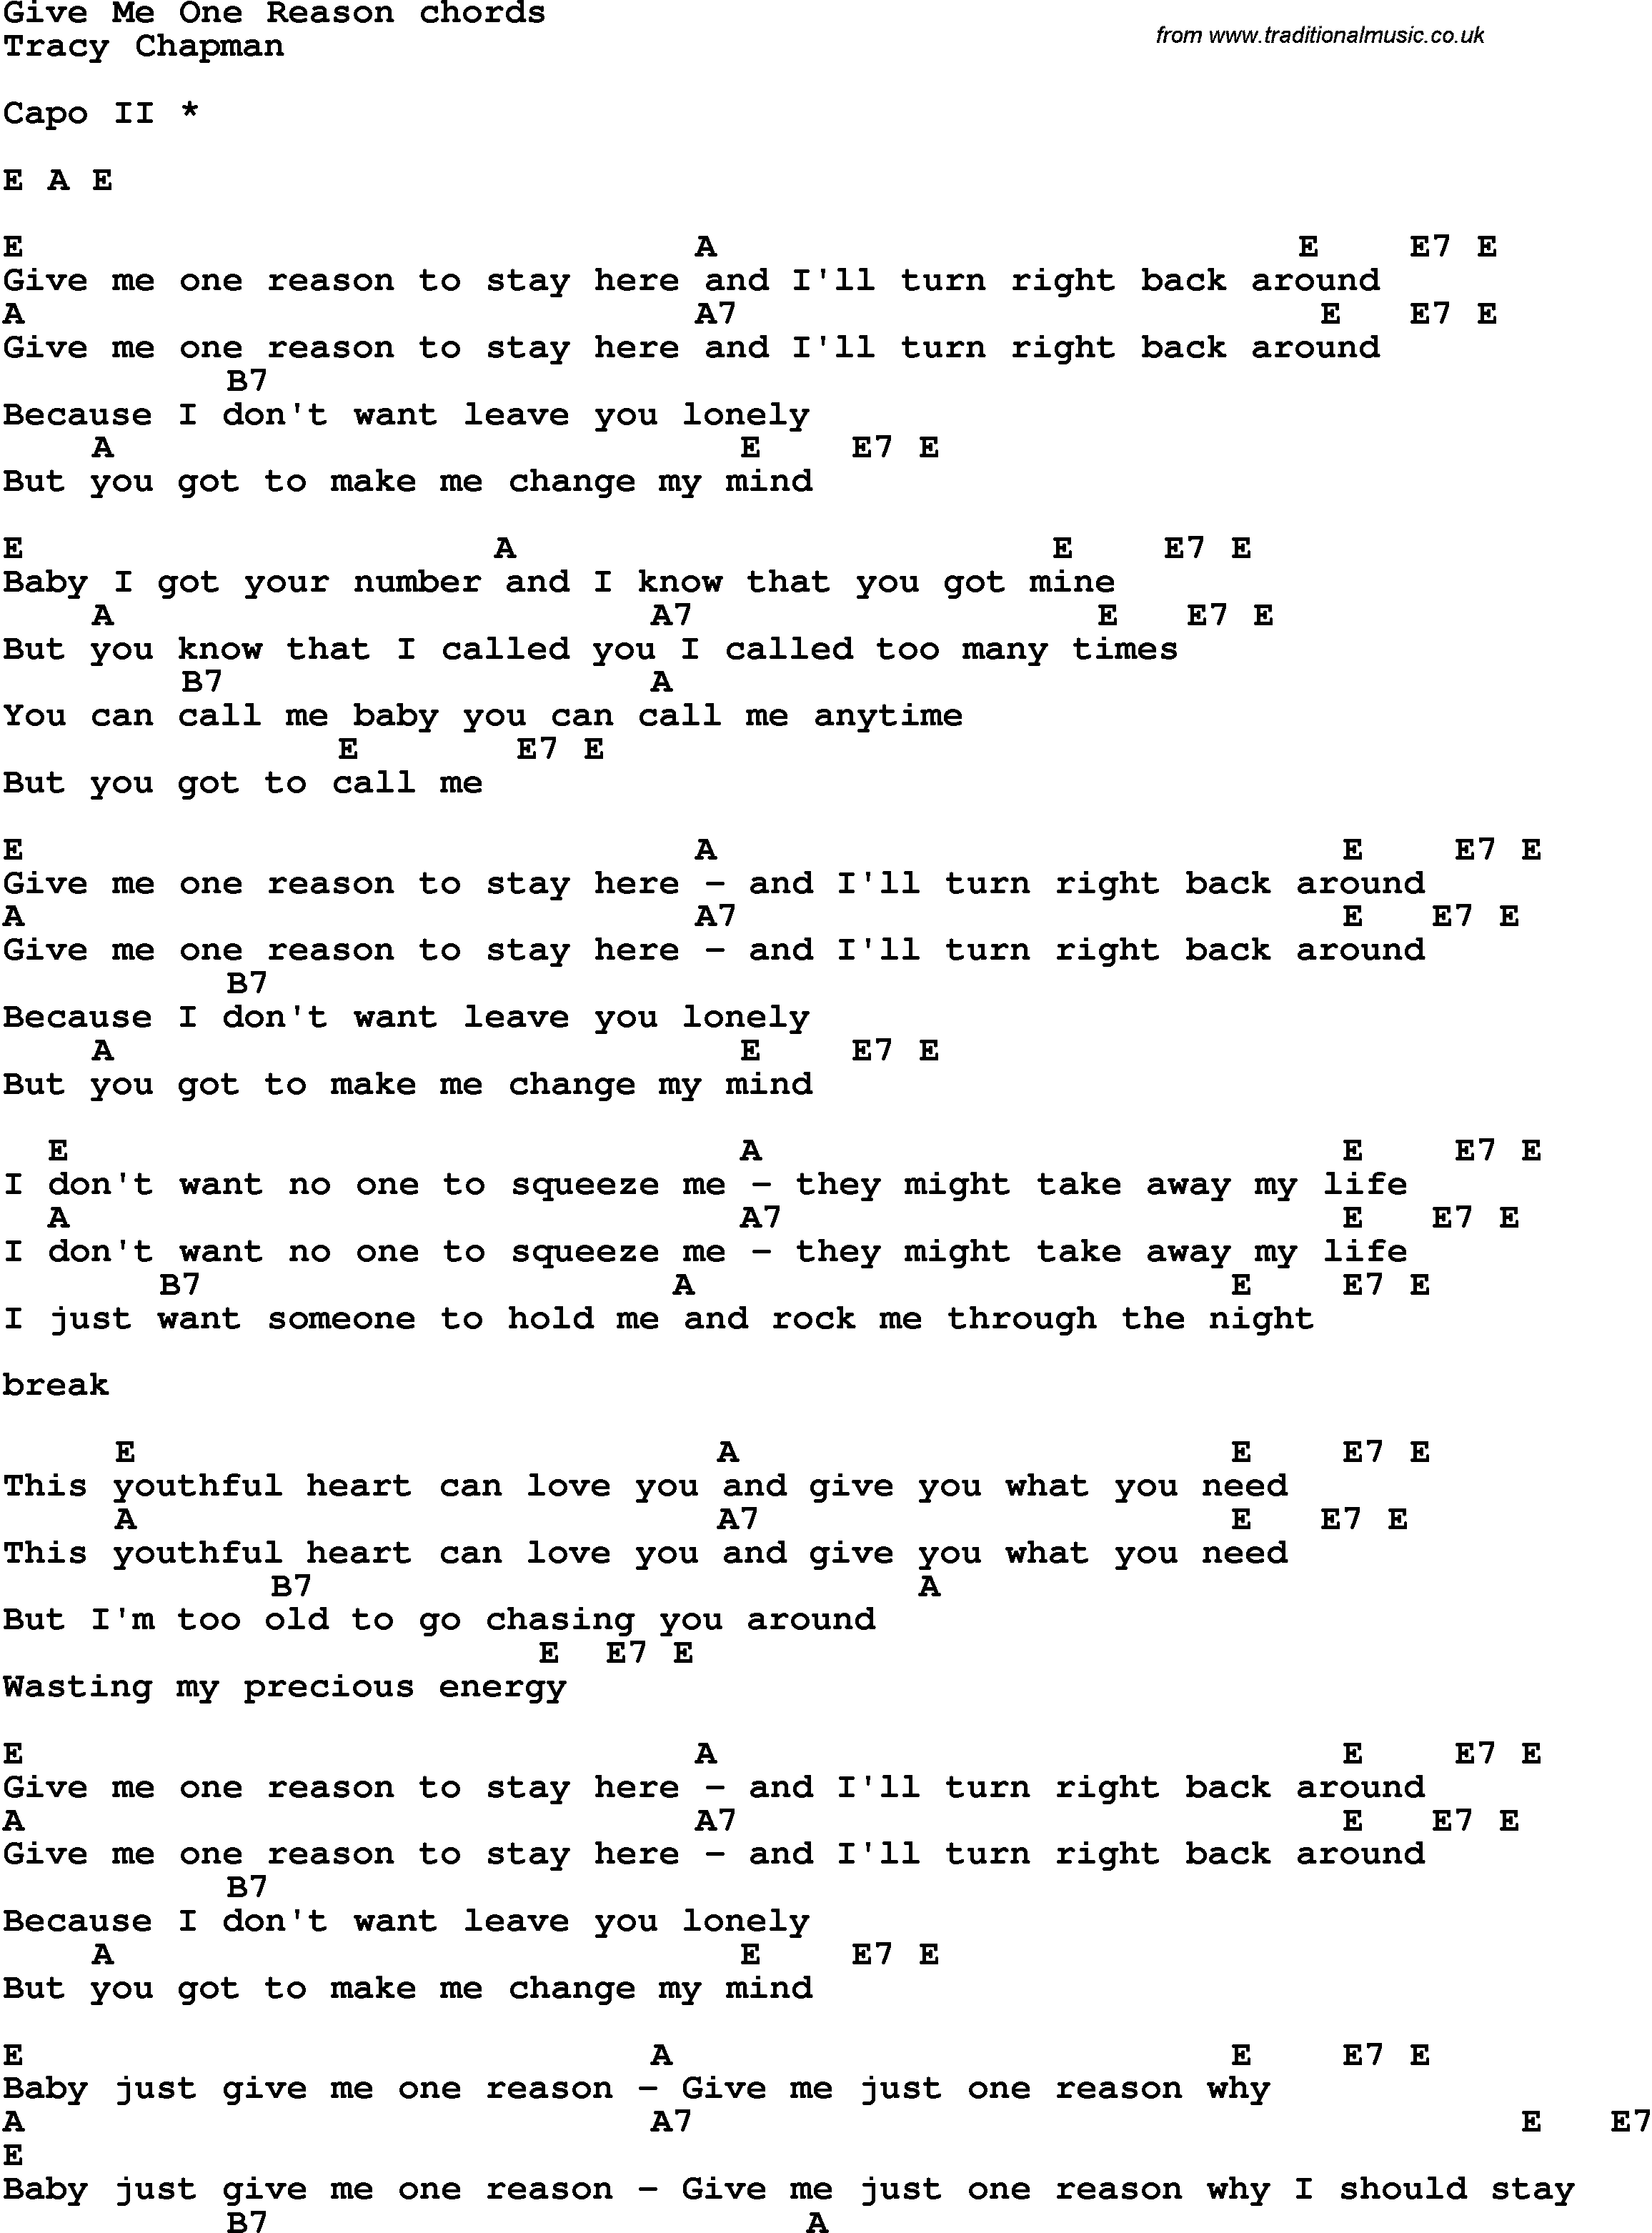 Song Lyrics with guitar chords for Give Me One Reason